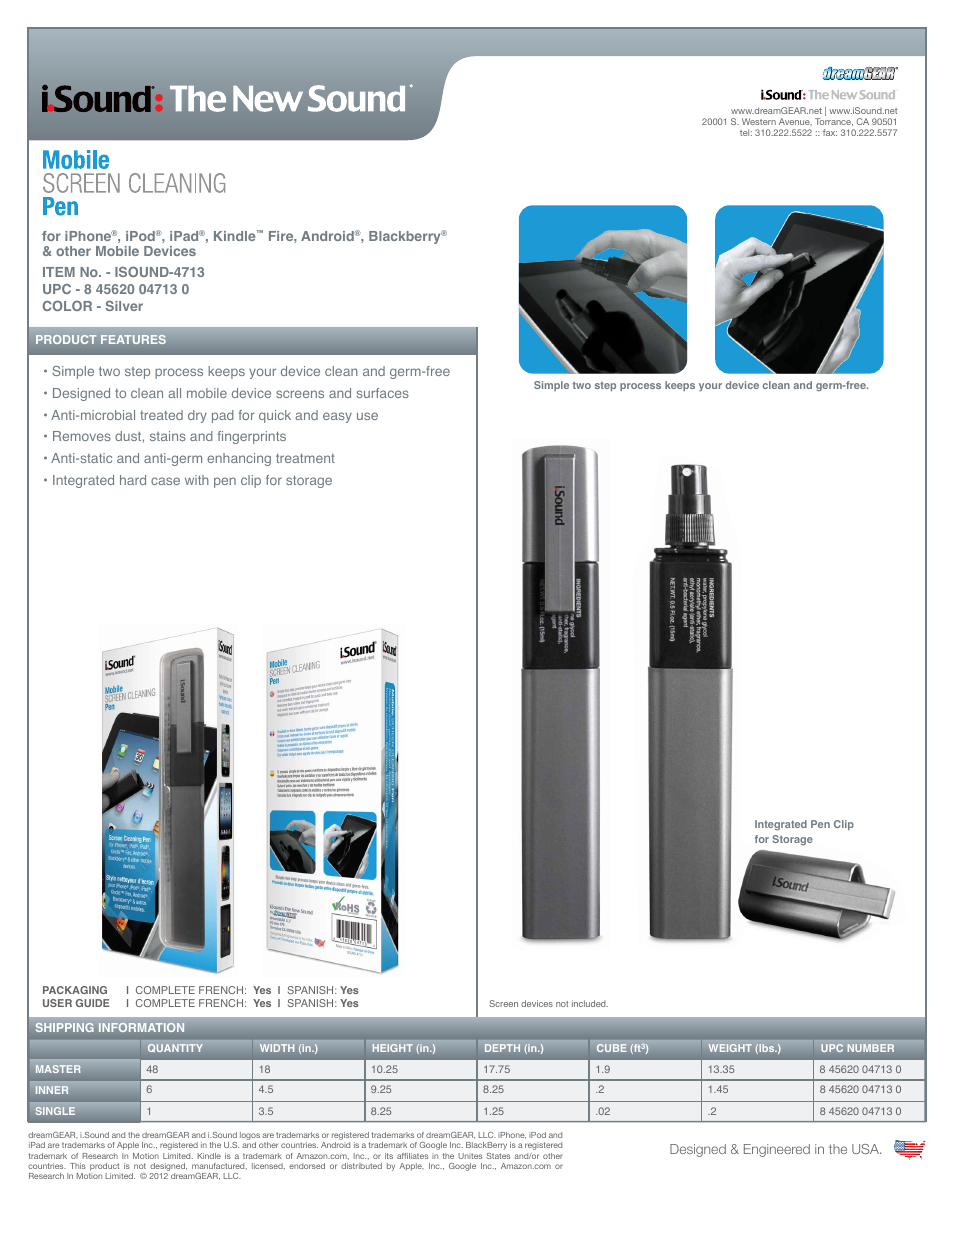 Mobile Screen Cleaning Pen - Sell Sheet